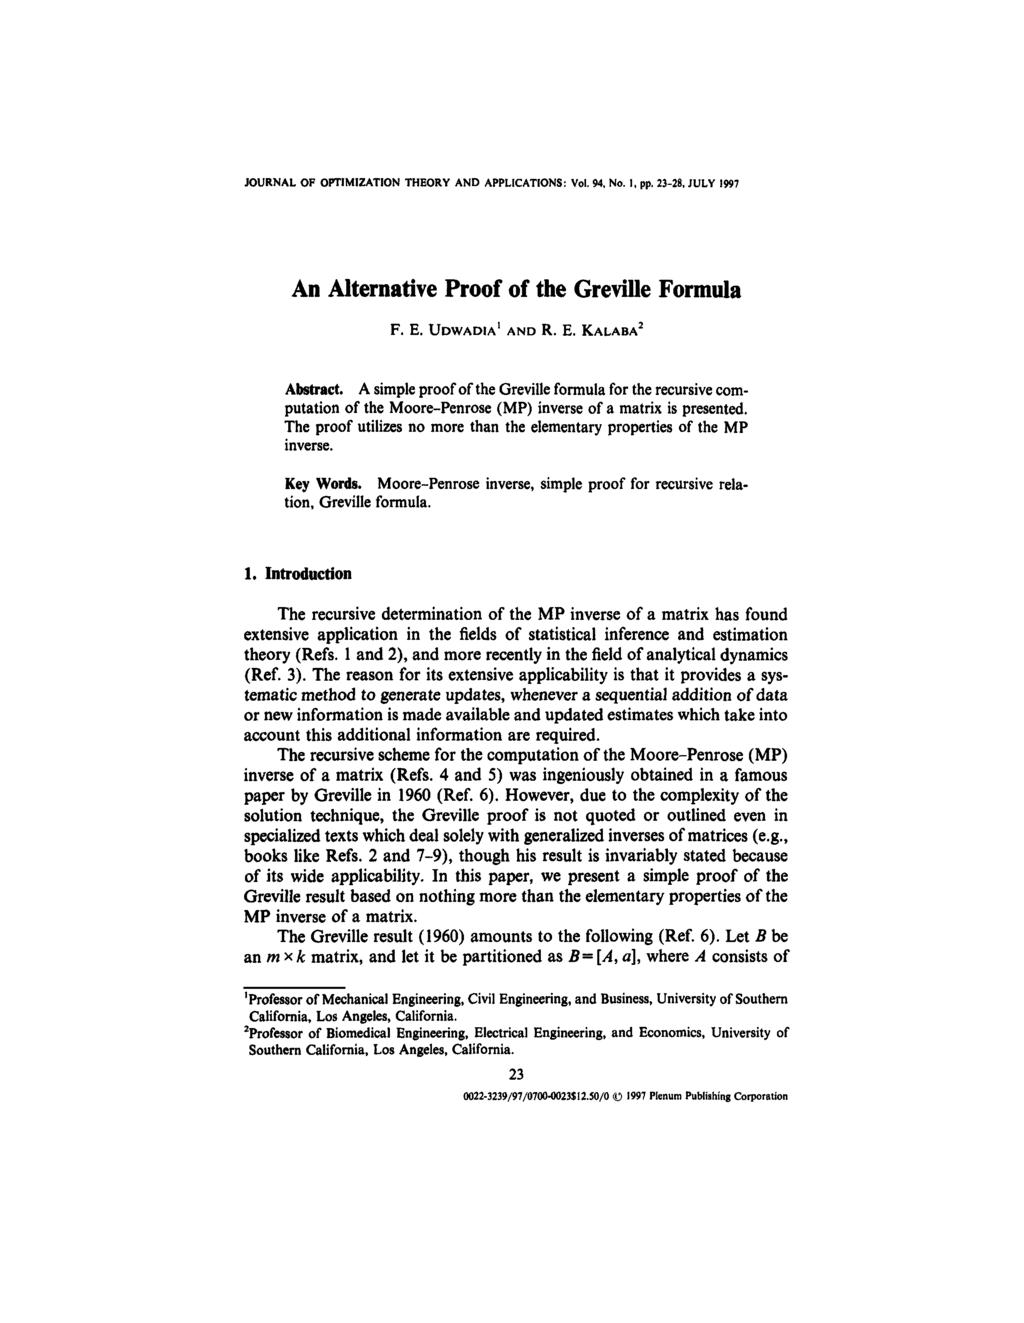 JOURNAL OF OPTIMIZATION THEORY AND APPLICATIONS: Vol. 94, No. 1, pp. 23-28, JULY 1997 An Alternative Proof of the Greville Formula F. E. UDWADIA1 AND R. E. KALABA2 Abstract.